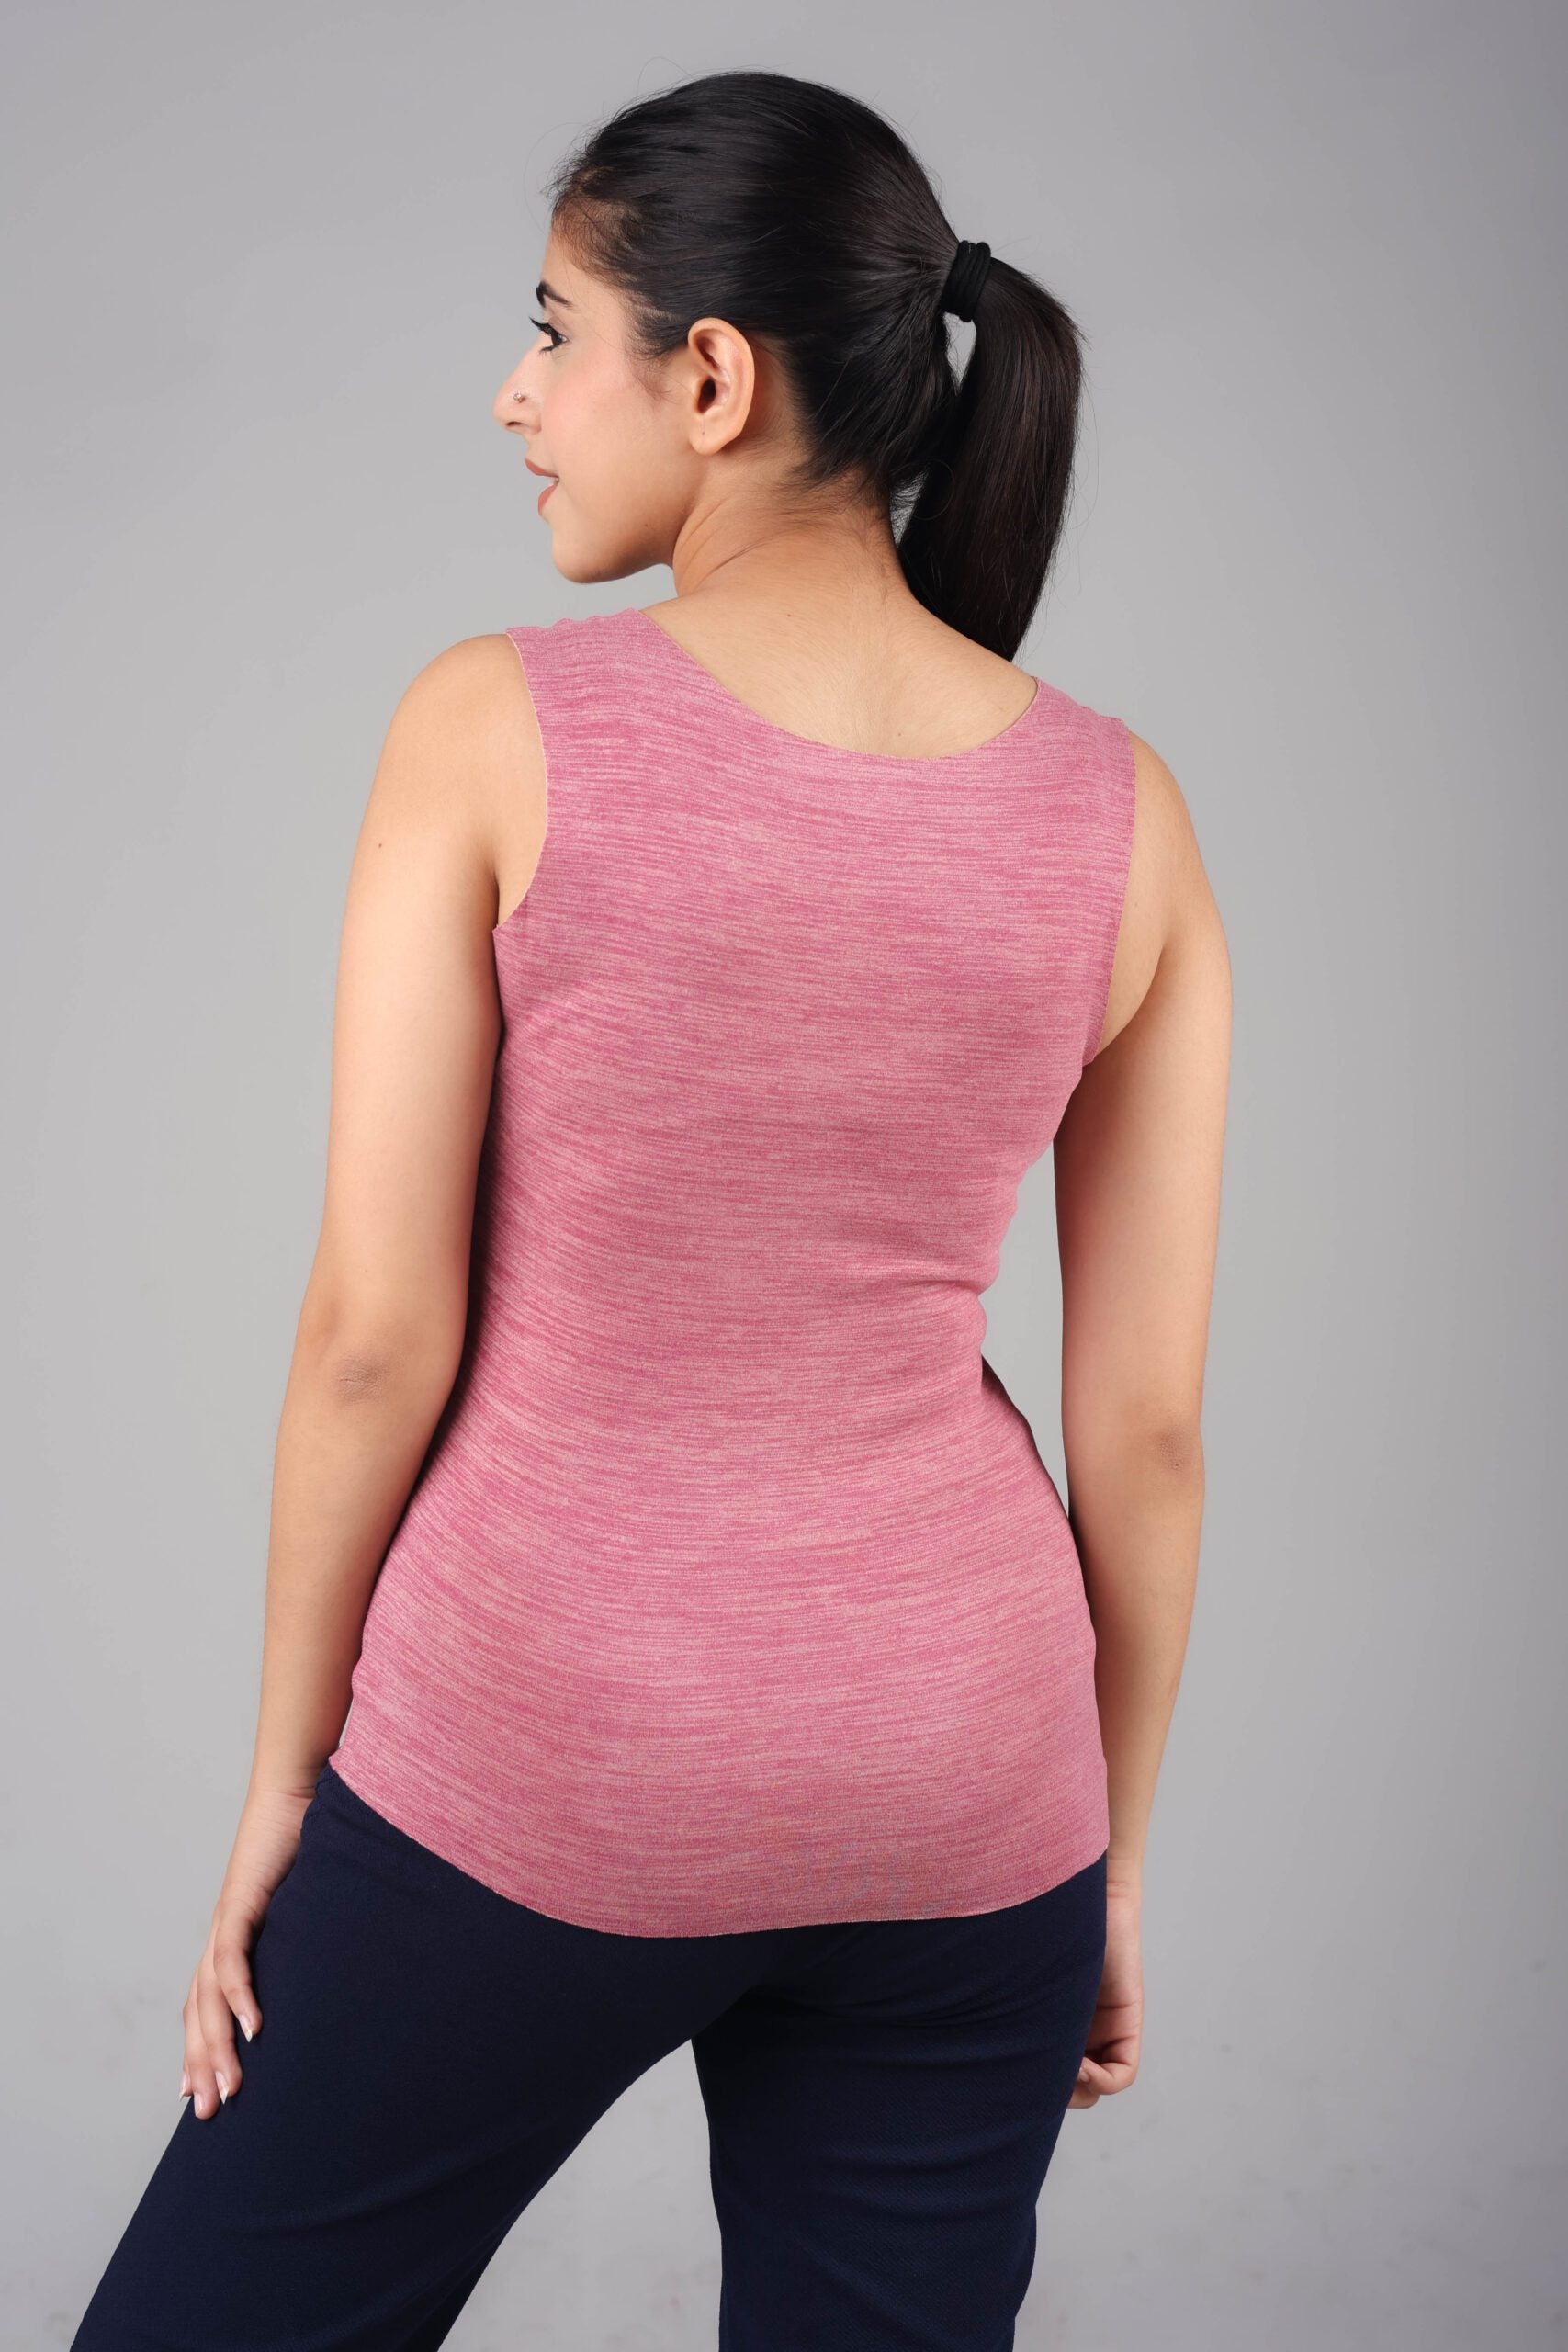 Dry-Fit Tank Top with Fur Inside (Hot Pink) Elevate Your Workout